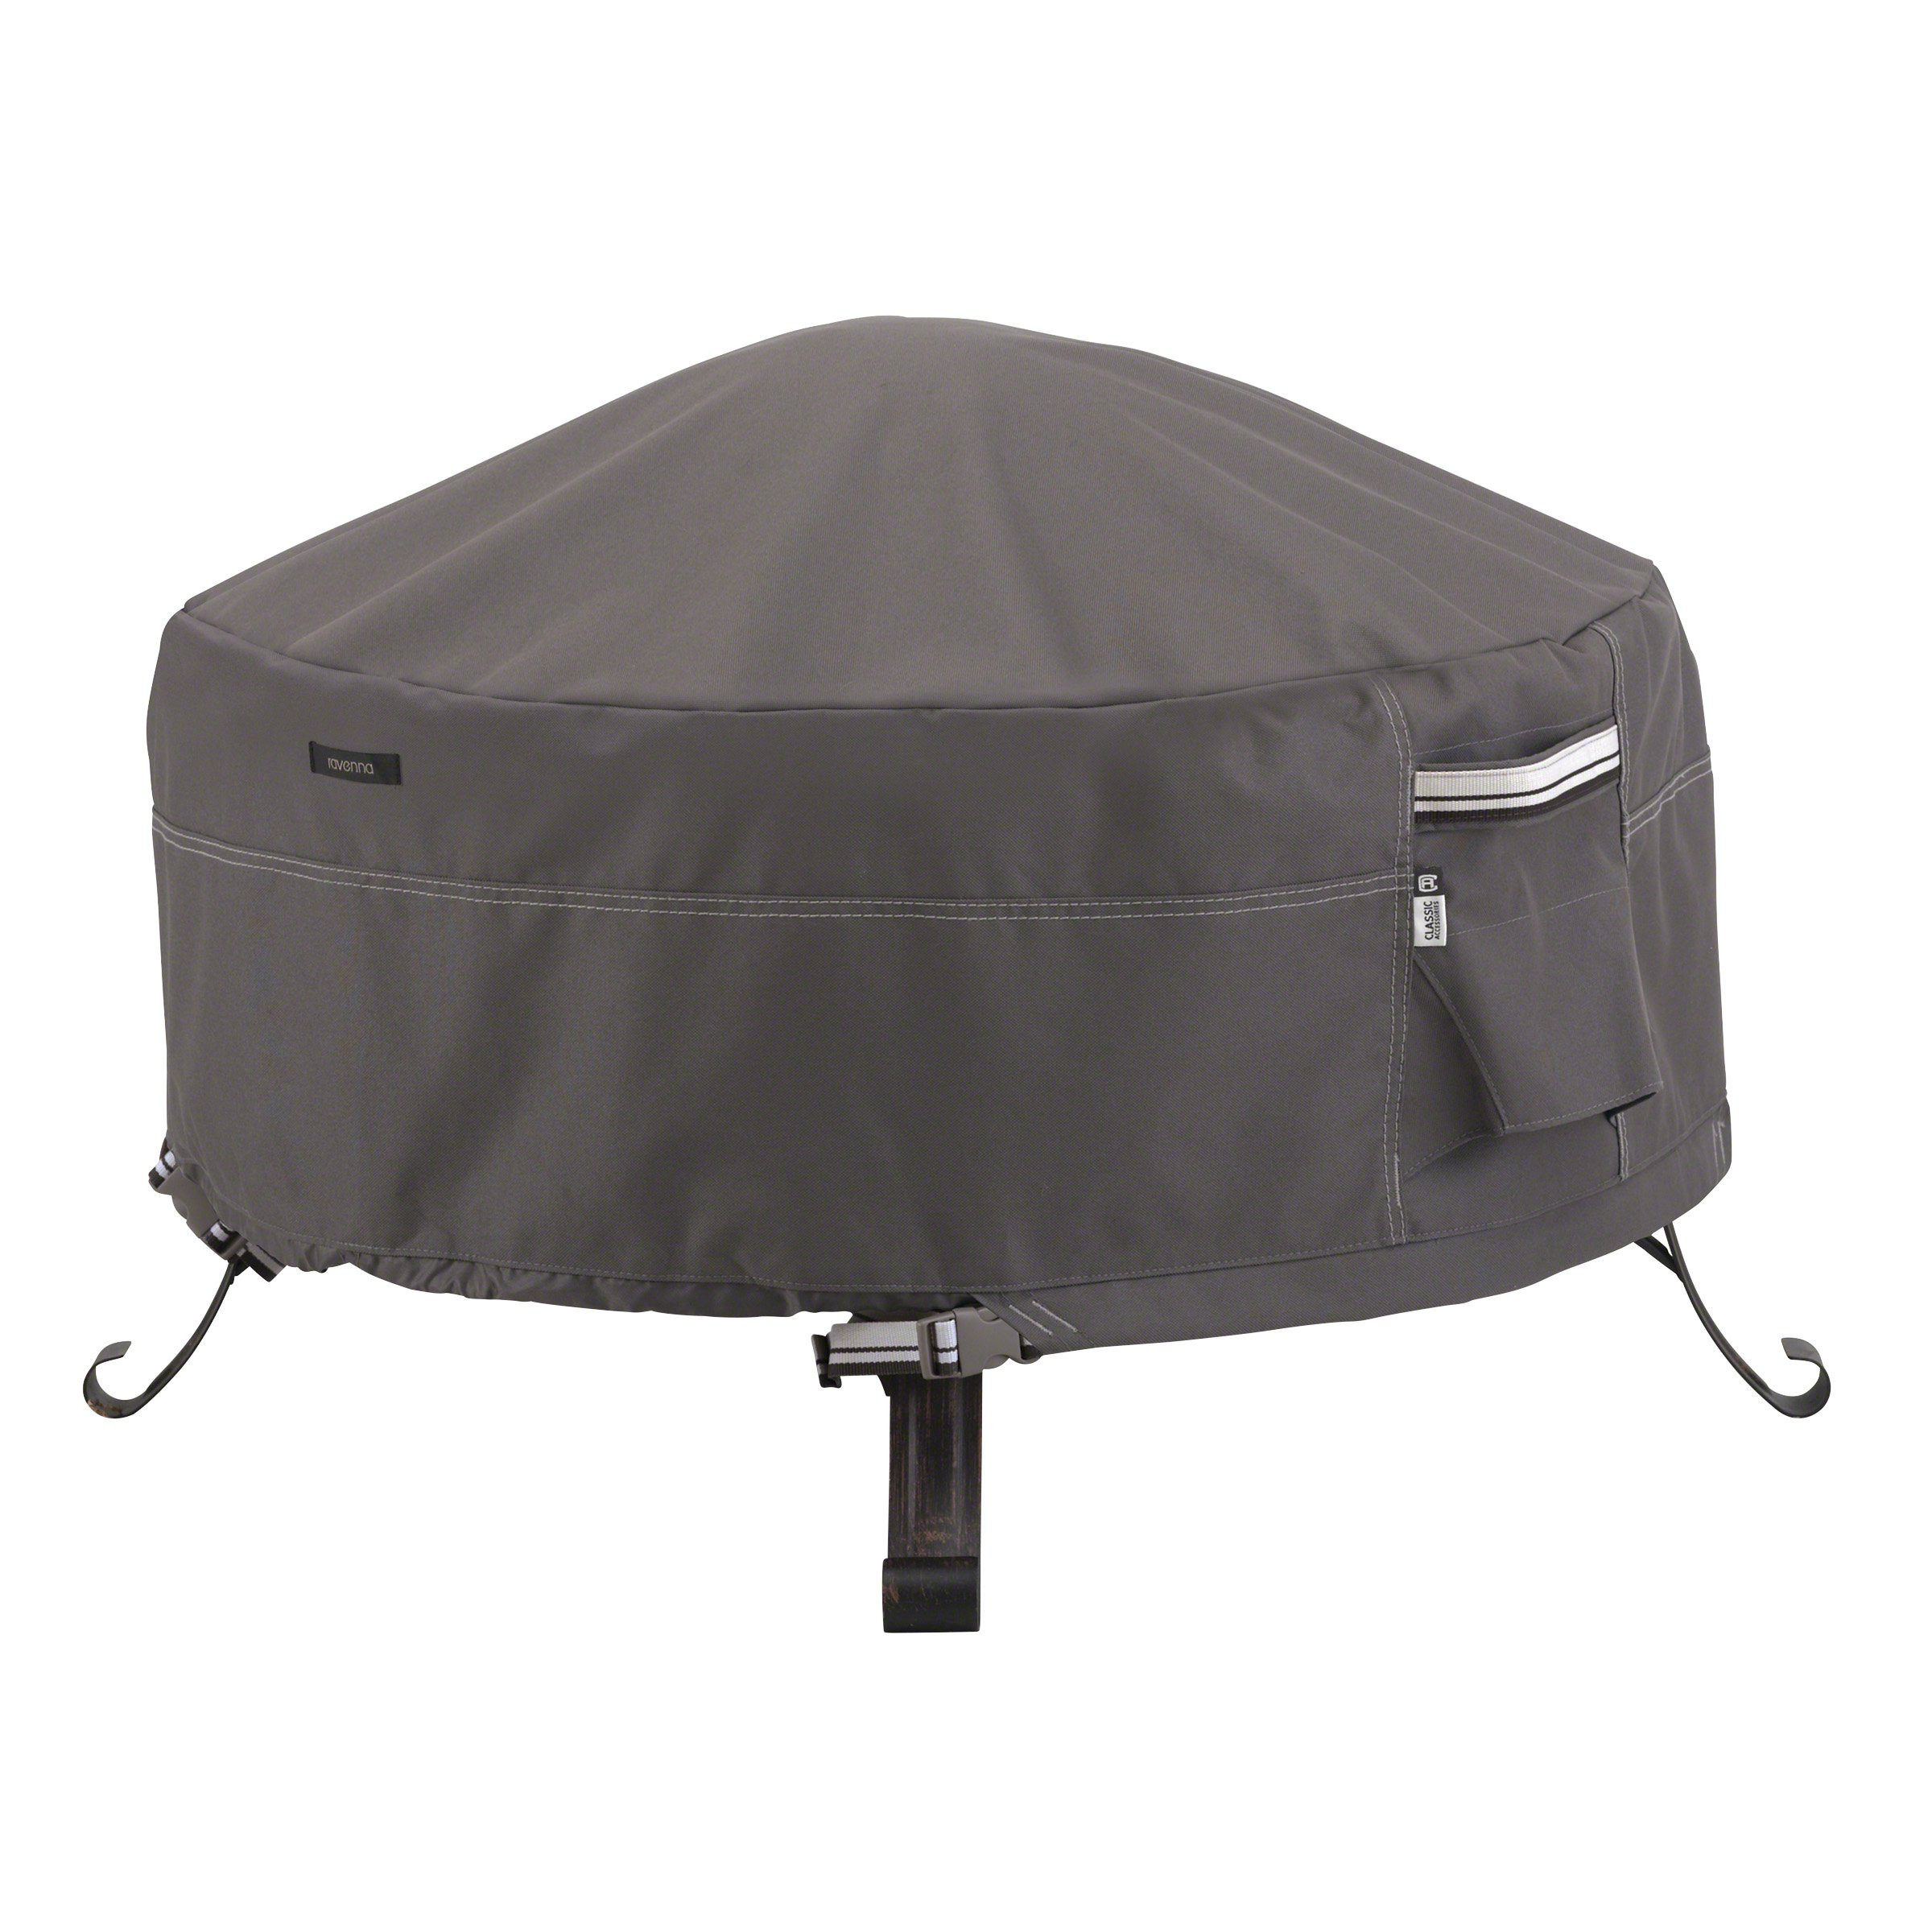 Round Firepit Cover
 Best Rated in Fire Pit Covers & Helpful Customer Reviews